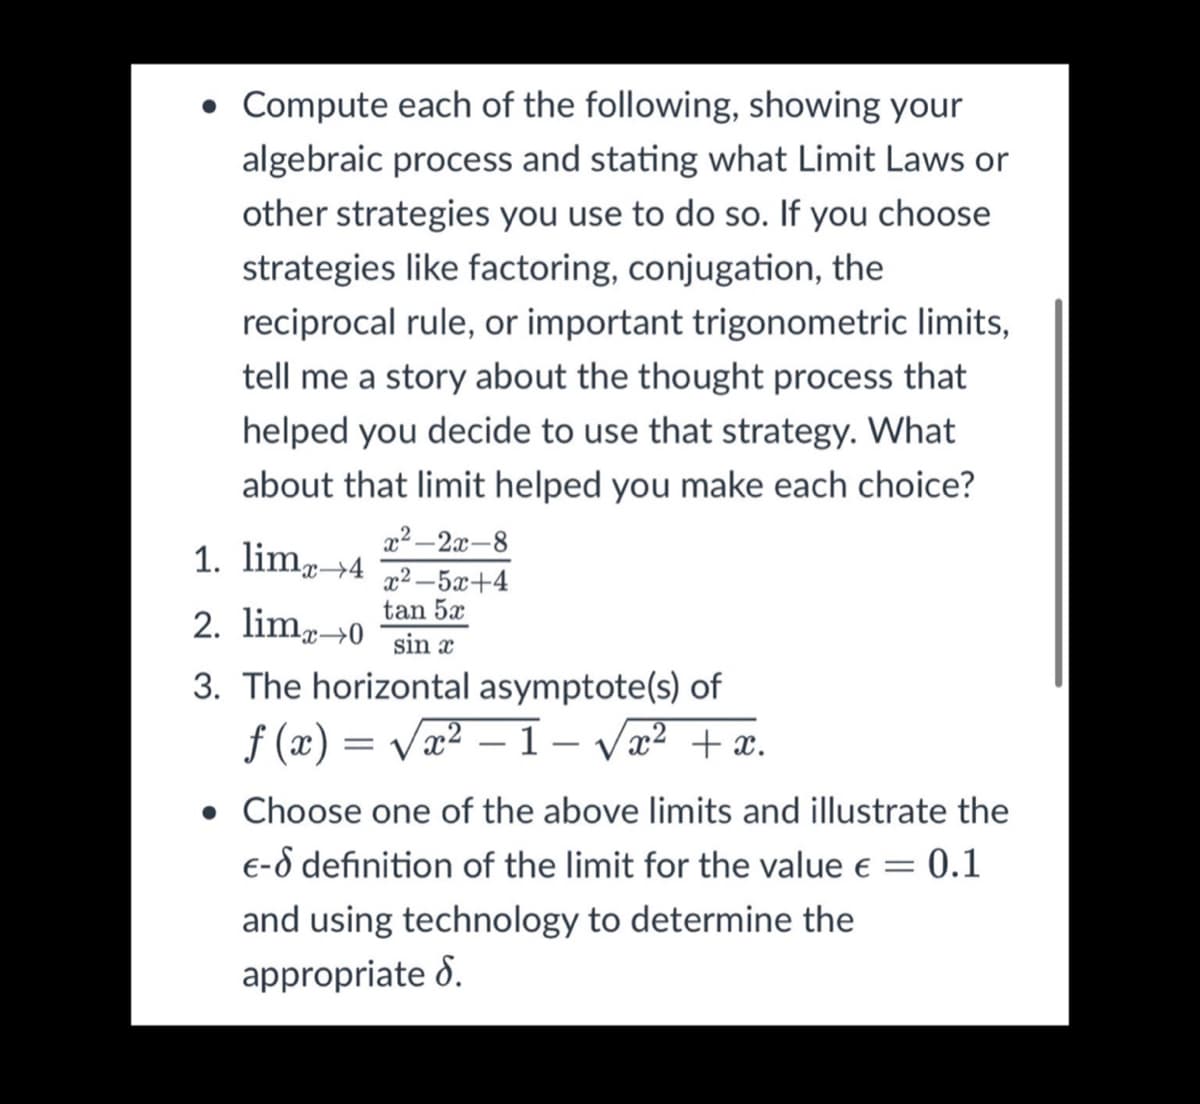 • Compute each of the following, showing your
algebraic process and stating what Limit Laws or
other strategies you use to do so. If you choose
strategies like factoring, conjugation, the
reciprocal rule, or important trigonometric limits,
tell me a story about the thought process that
helped you decide to use that strategy. What
about that limit helped you make each choice?
1. limg→4
x2 -2x-8
x2 -5x+4
tan 5x
2. limp0
sin x
3. The horizontal asymptote(s) of
f (x) = Vx2 – 1– Væ? + x.
• Choose one of the above limits and illustrate the
E-d definition of the limit for the value e = 0.1
and using technology to determine the
appropriate 8.
